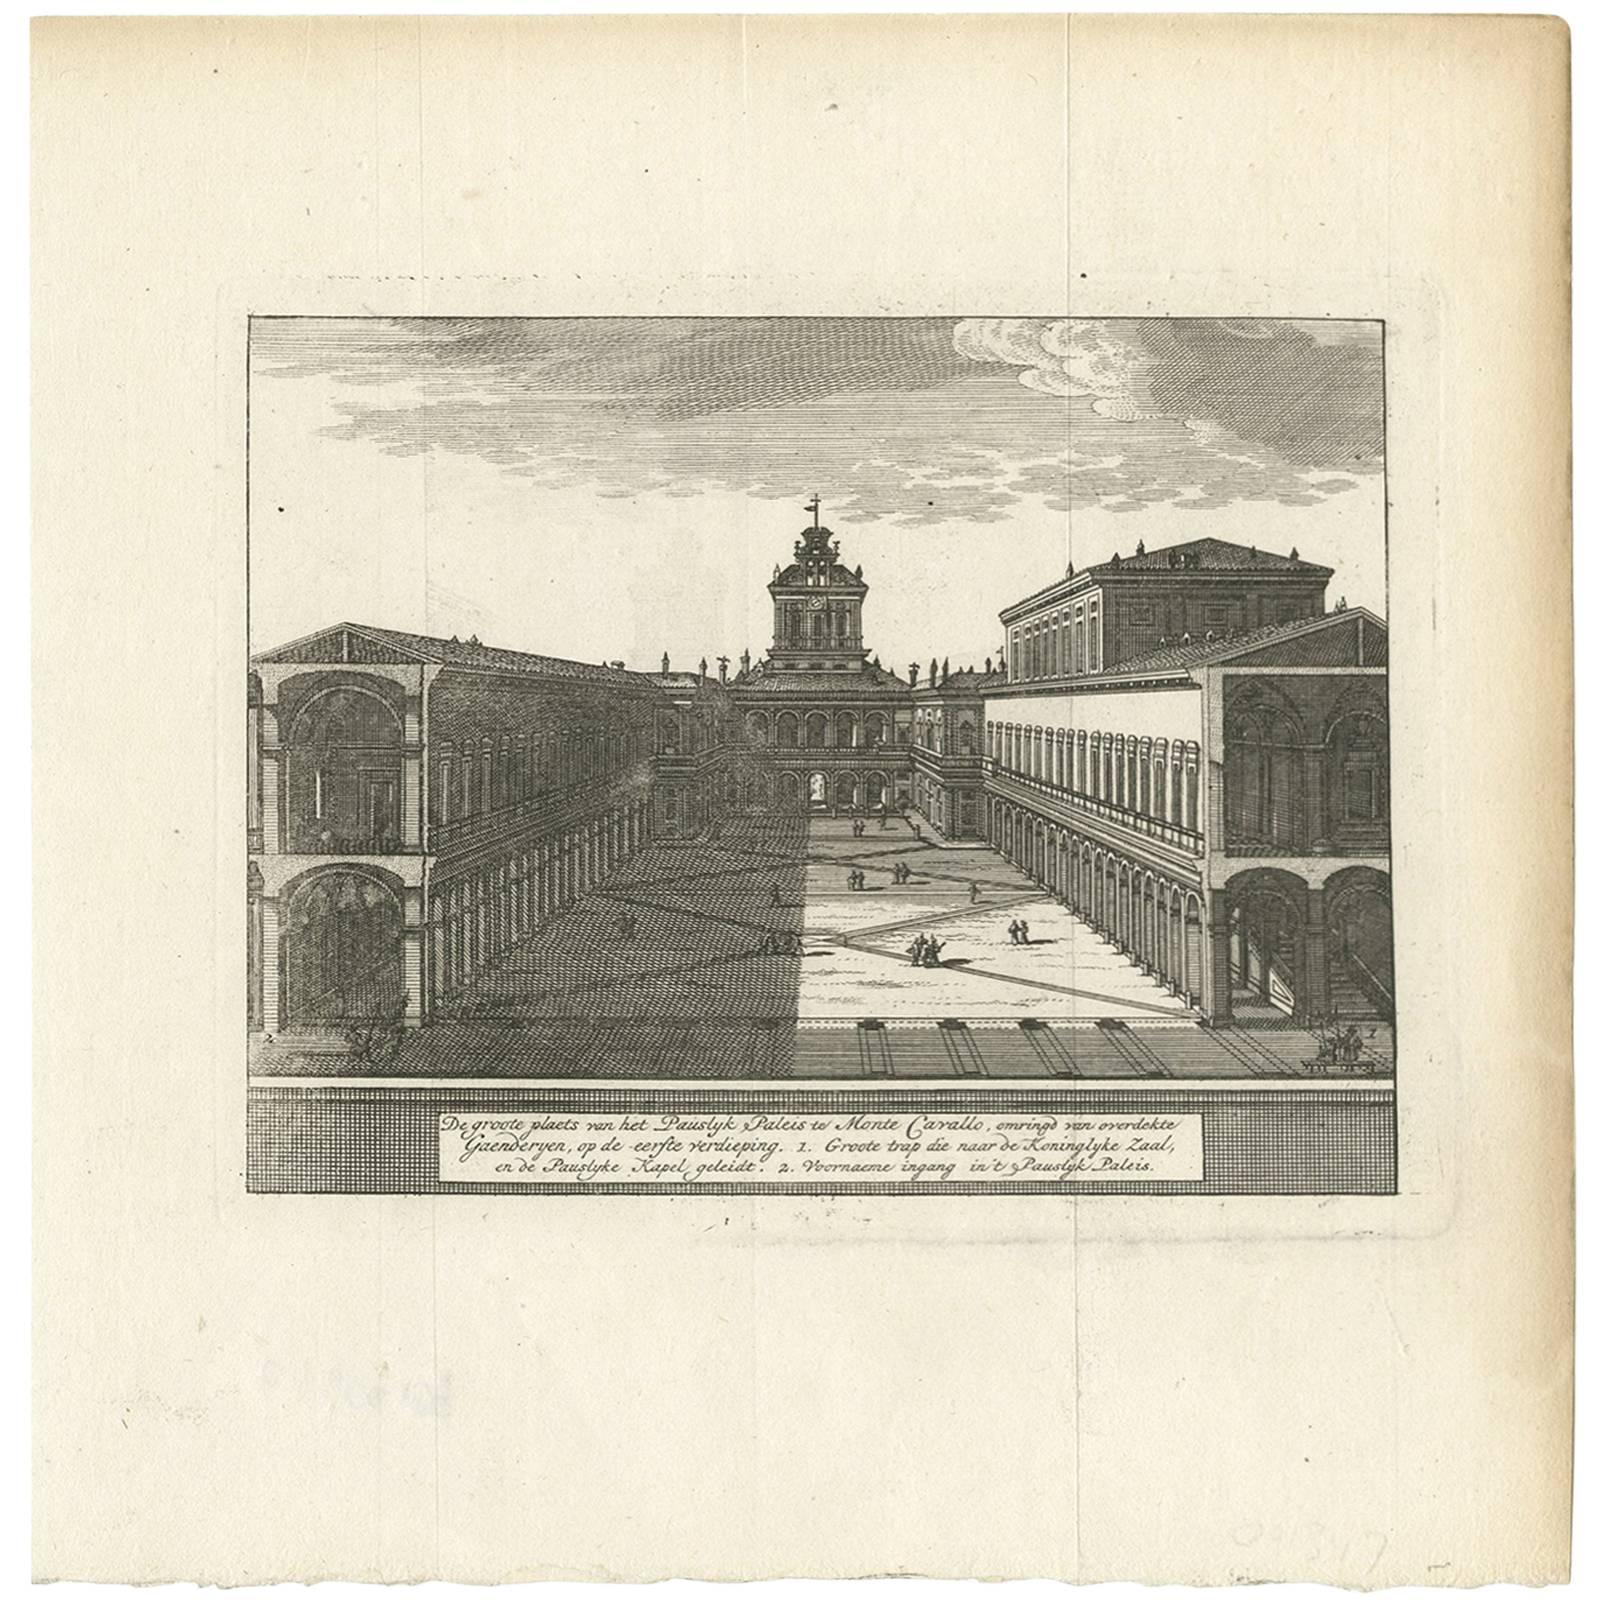 Antique Print of the Court at the Palace of Monte Cavallo, Rome